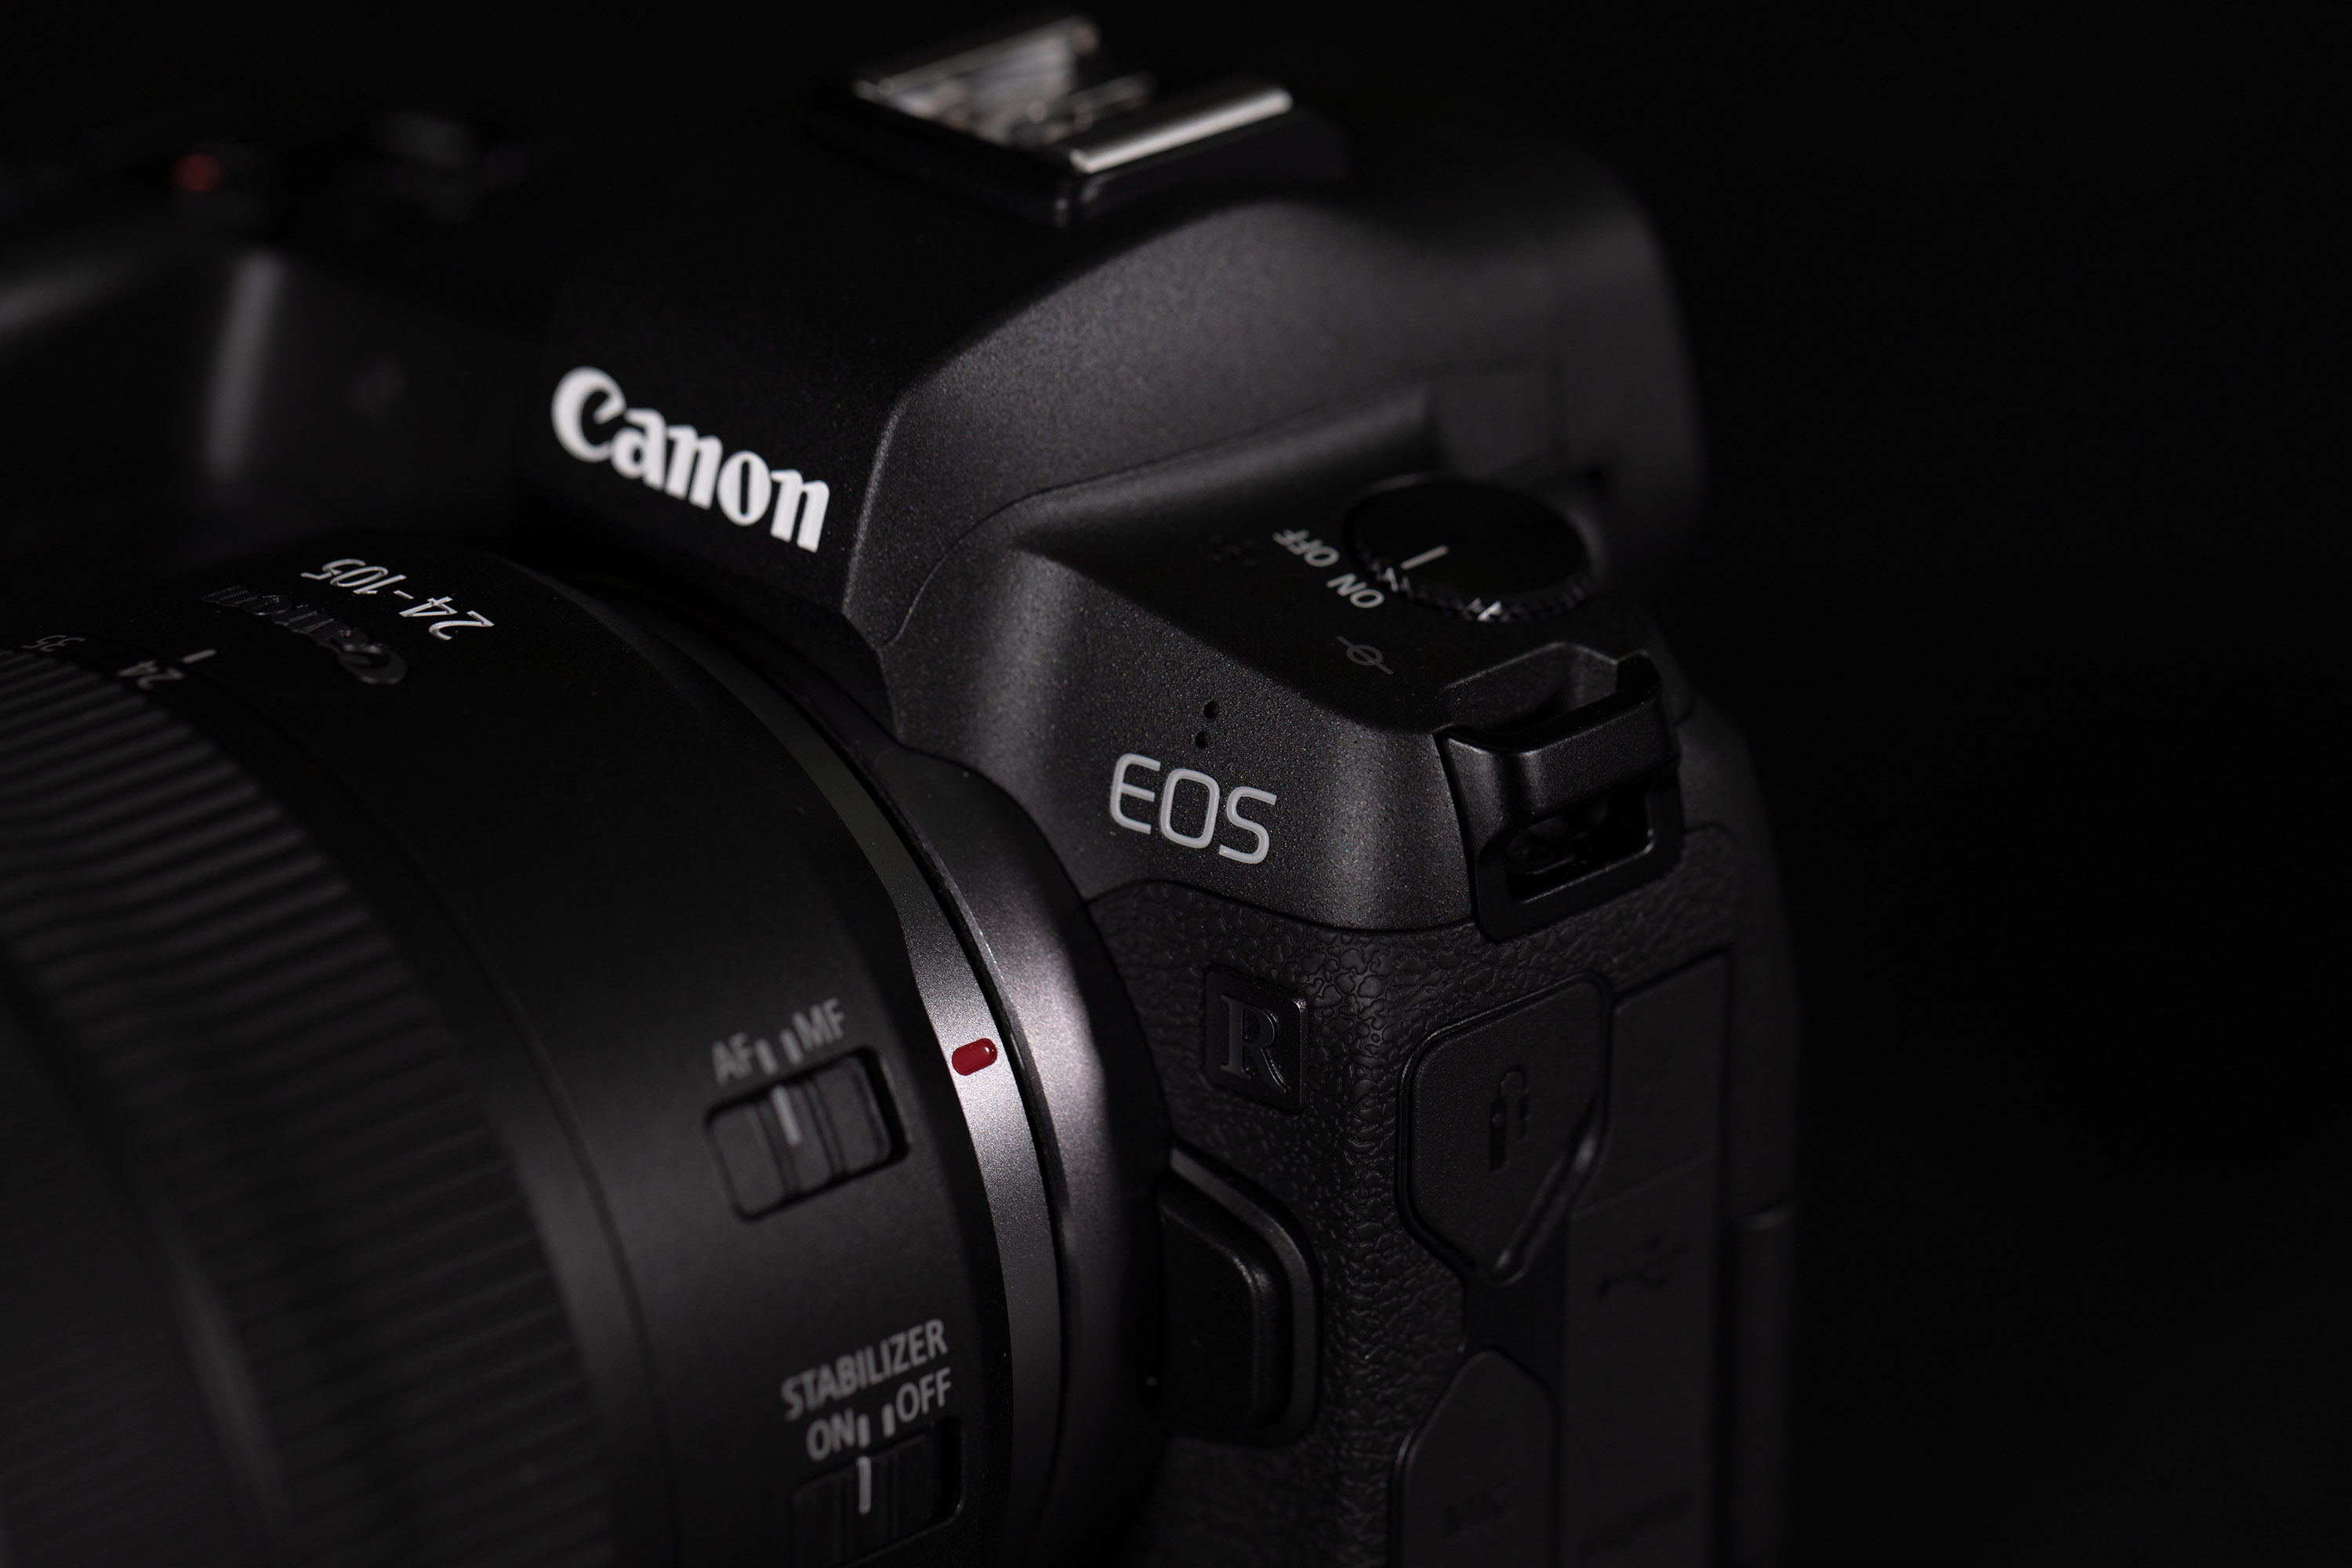 Everything you need to know about Canon's EOS R mirrorless camera